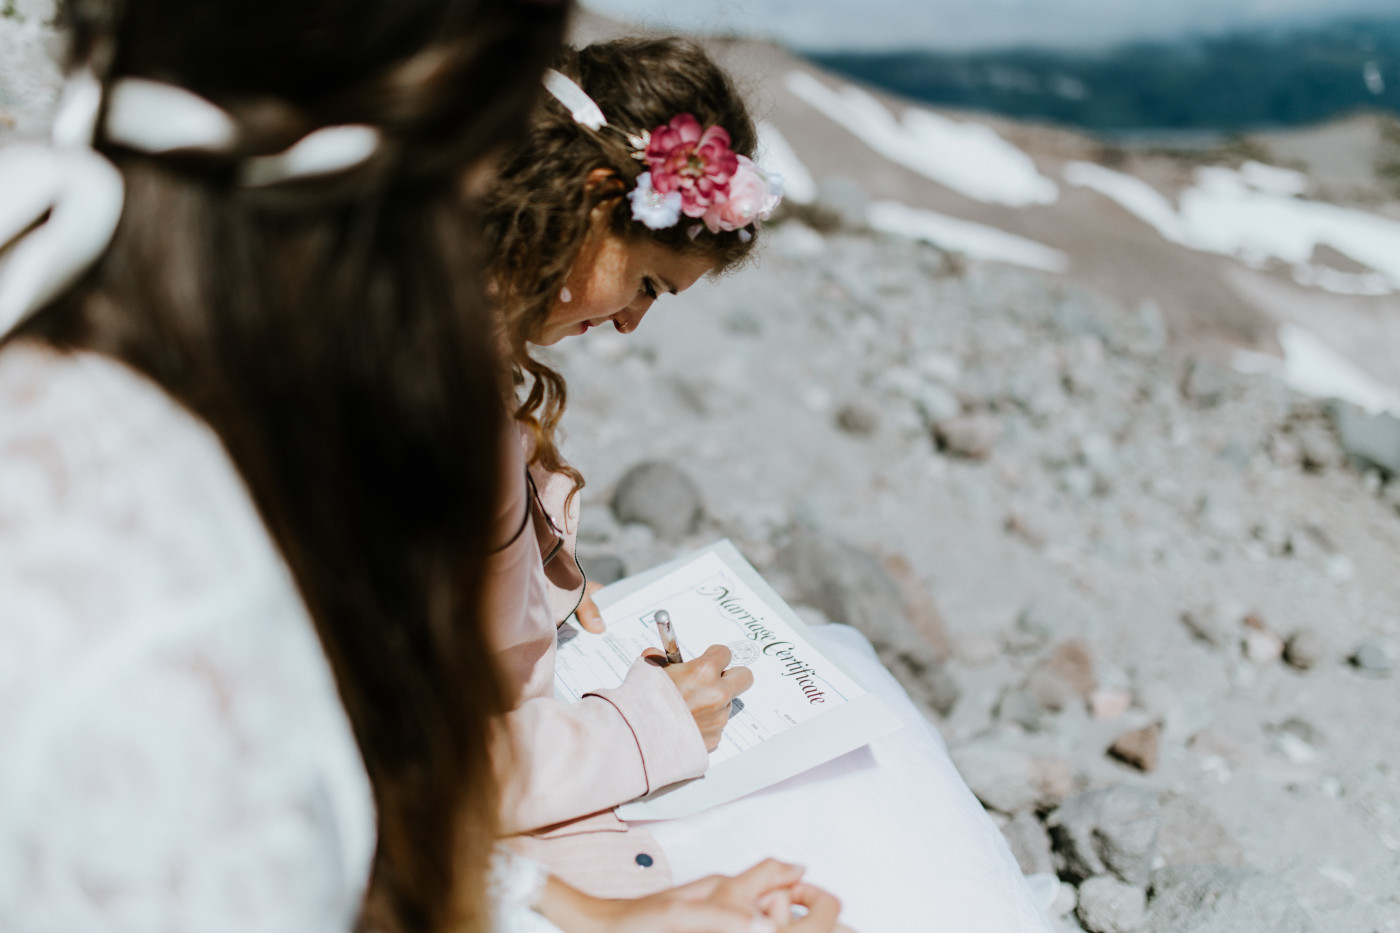 Margaux and Heather sign their marriage certificate. Elopement photography at Mount Hood by Sienna Plus Josh.